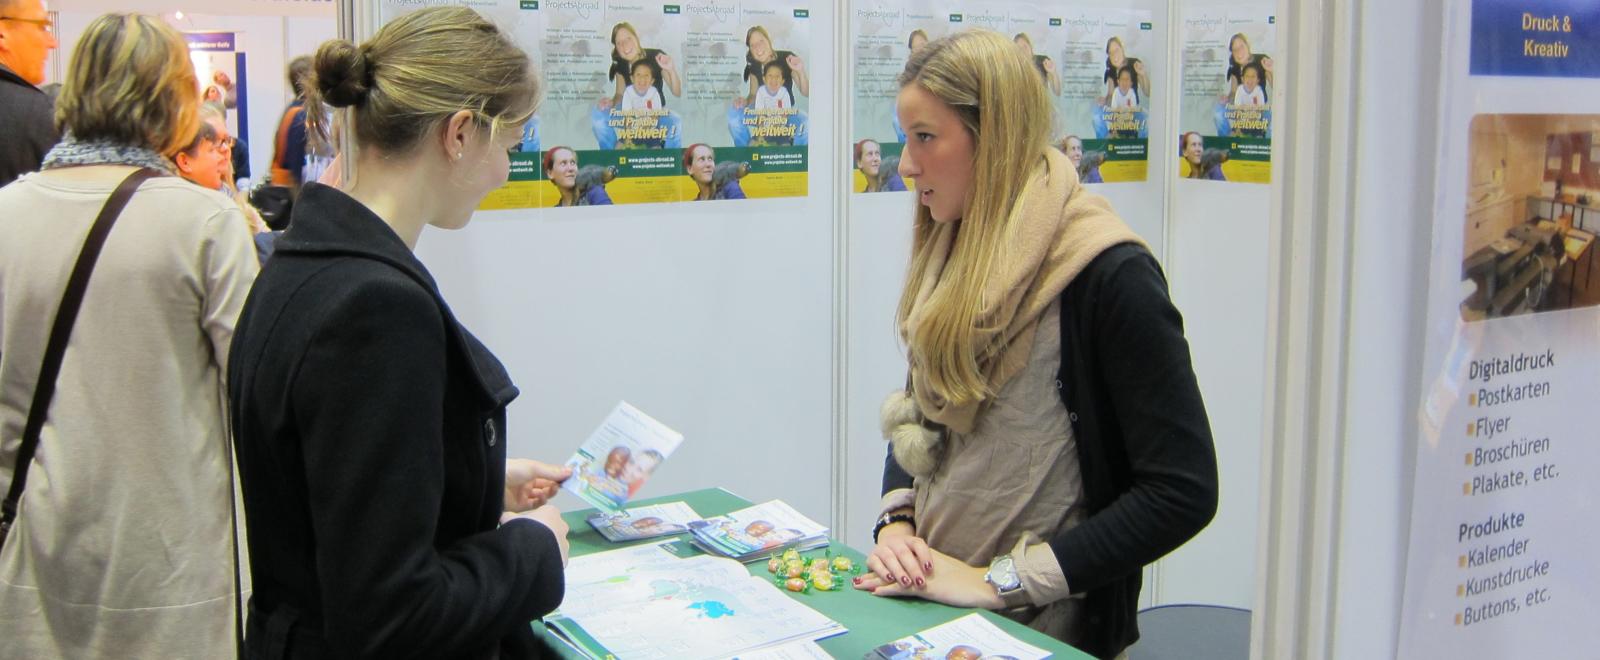 A Projects Abroad staff member chats to a career fair attendant about volunteering abroad.